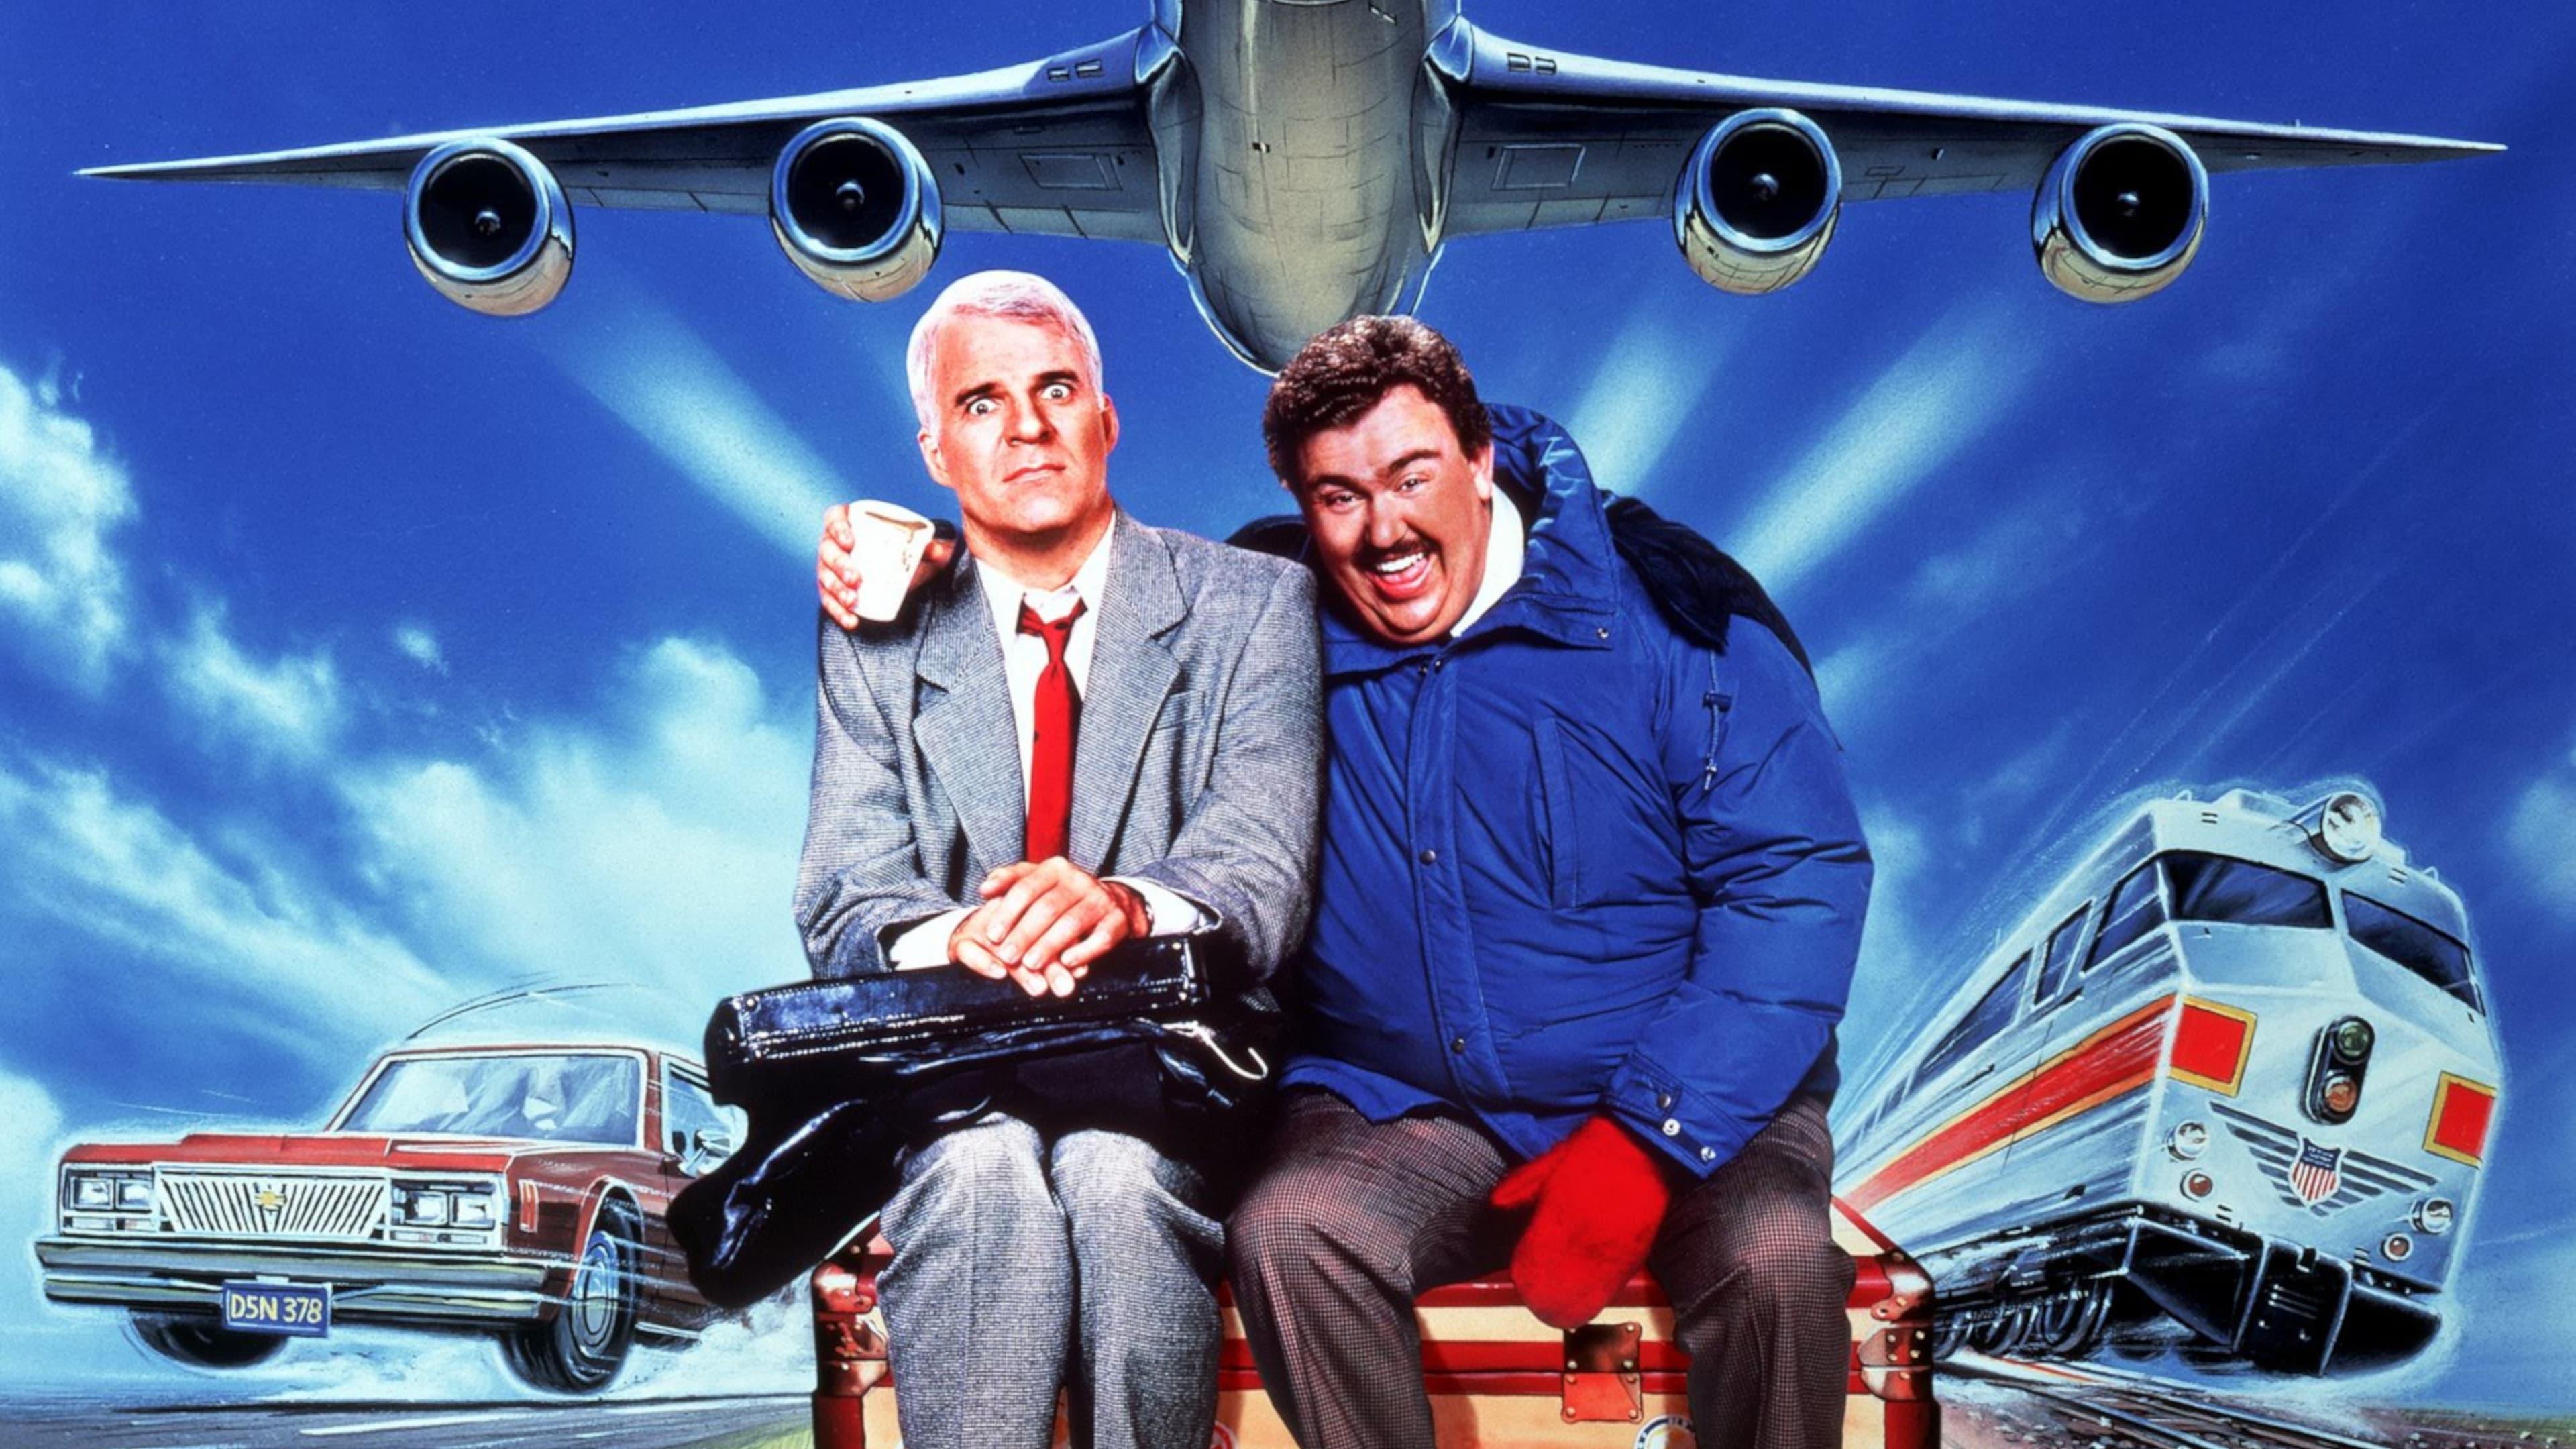 Planes, Trains and Automobiles backdrop